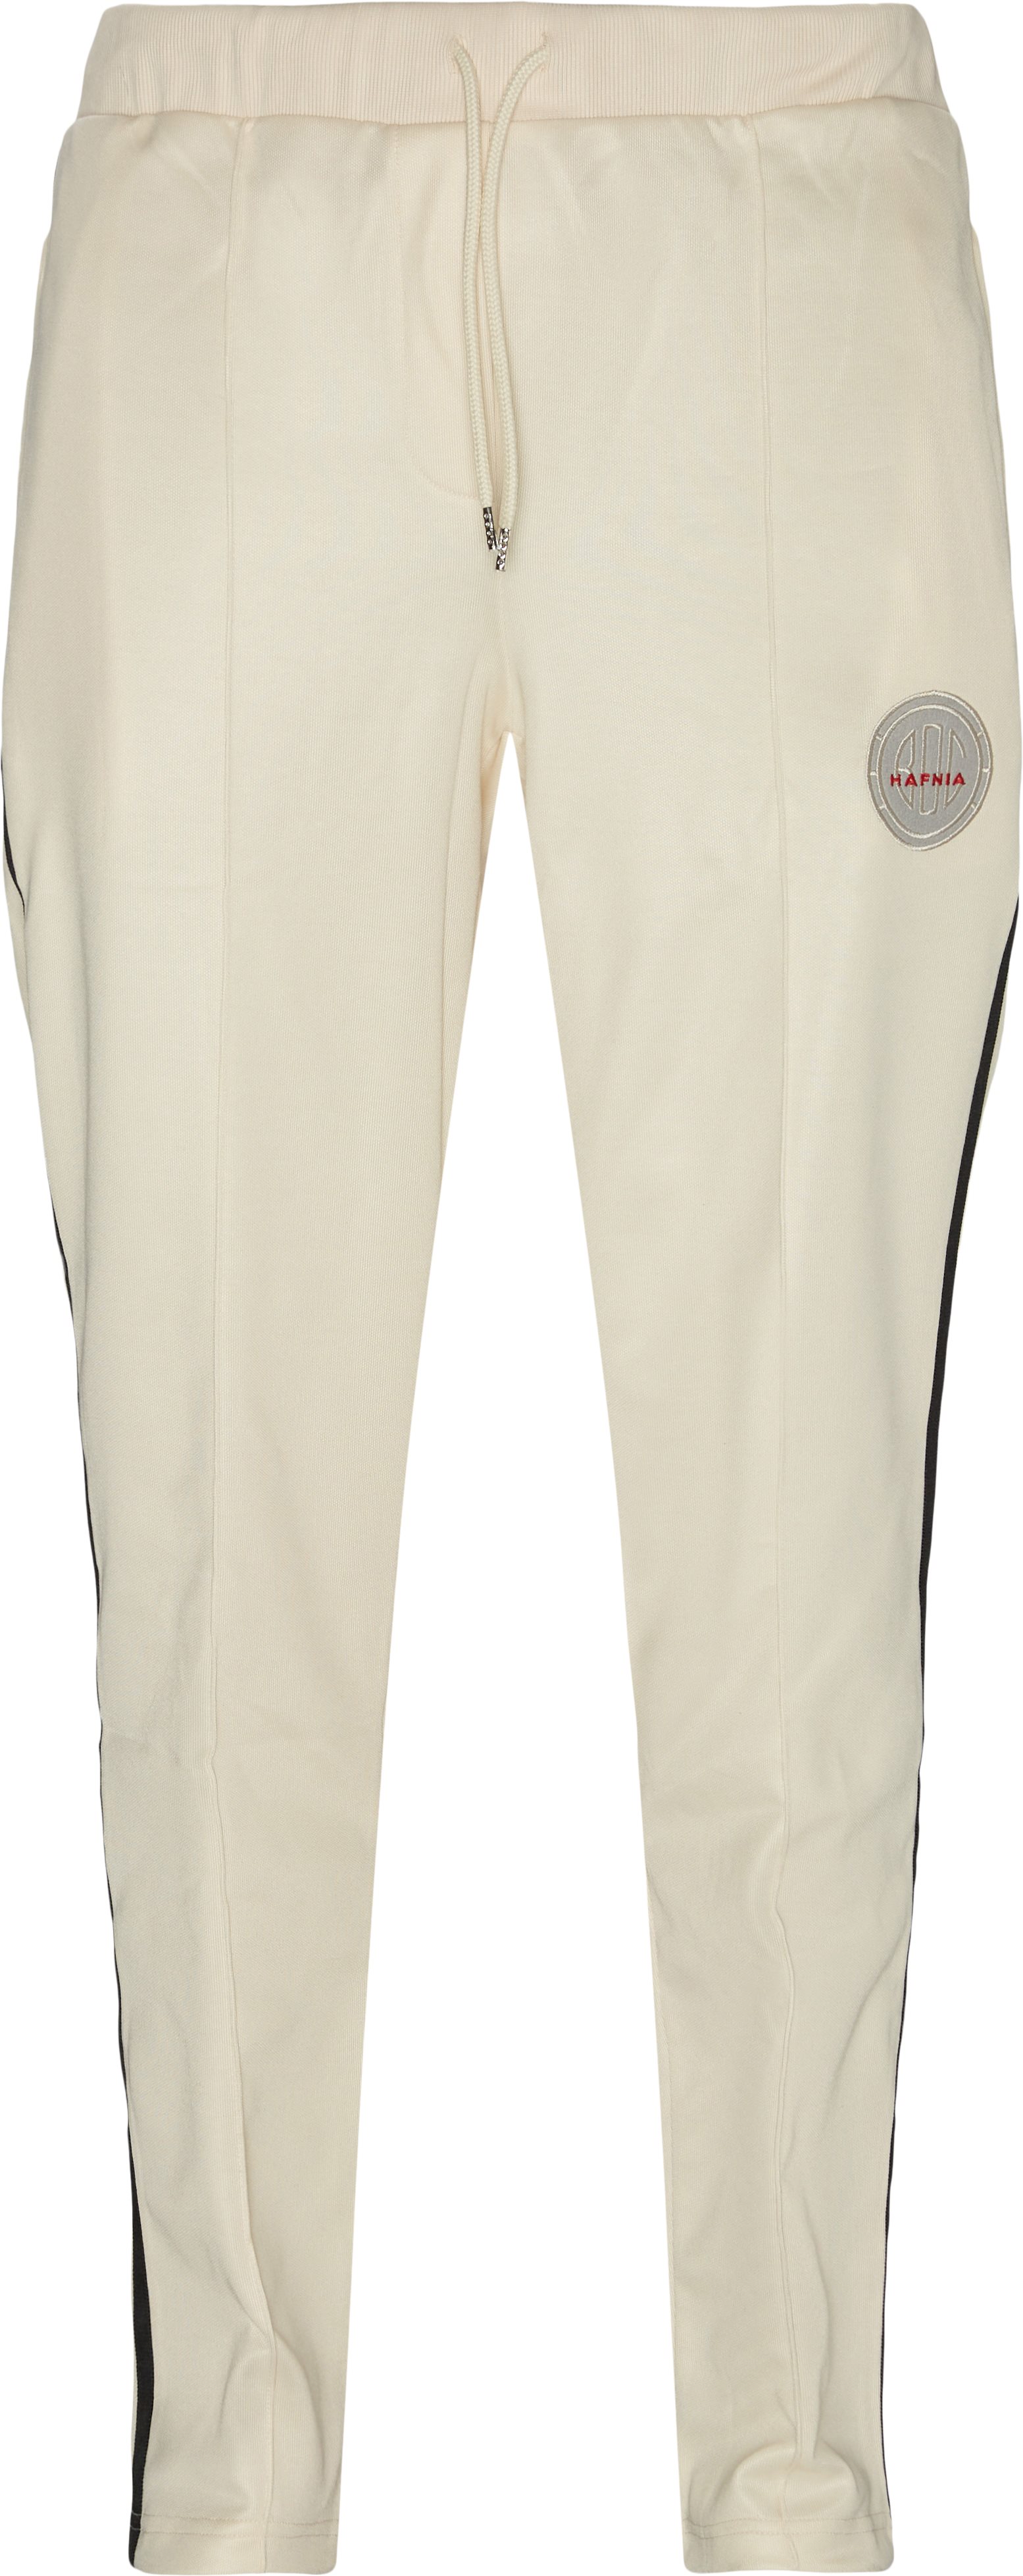 BOCxBLS Trackpants - Trousers - Regular fit - Sand